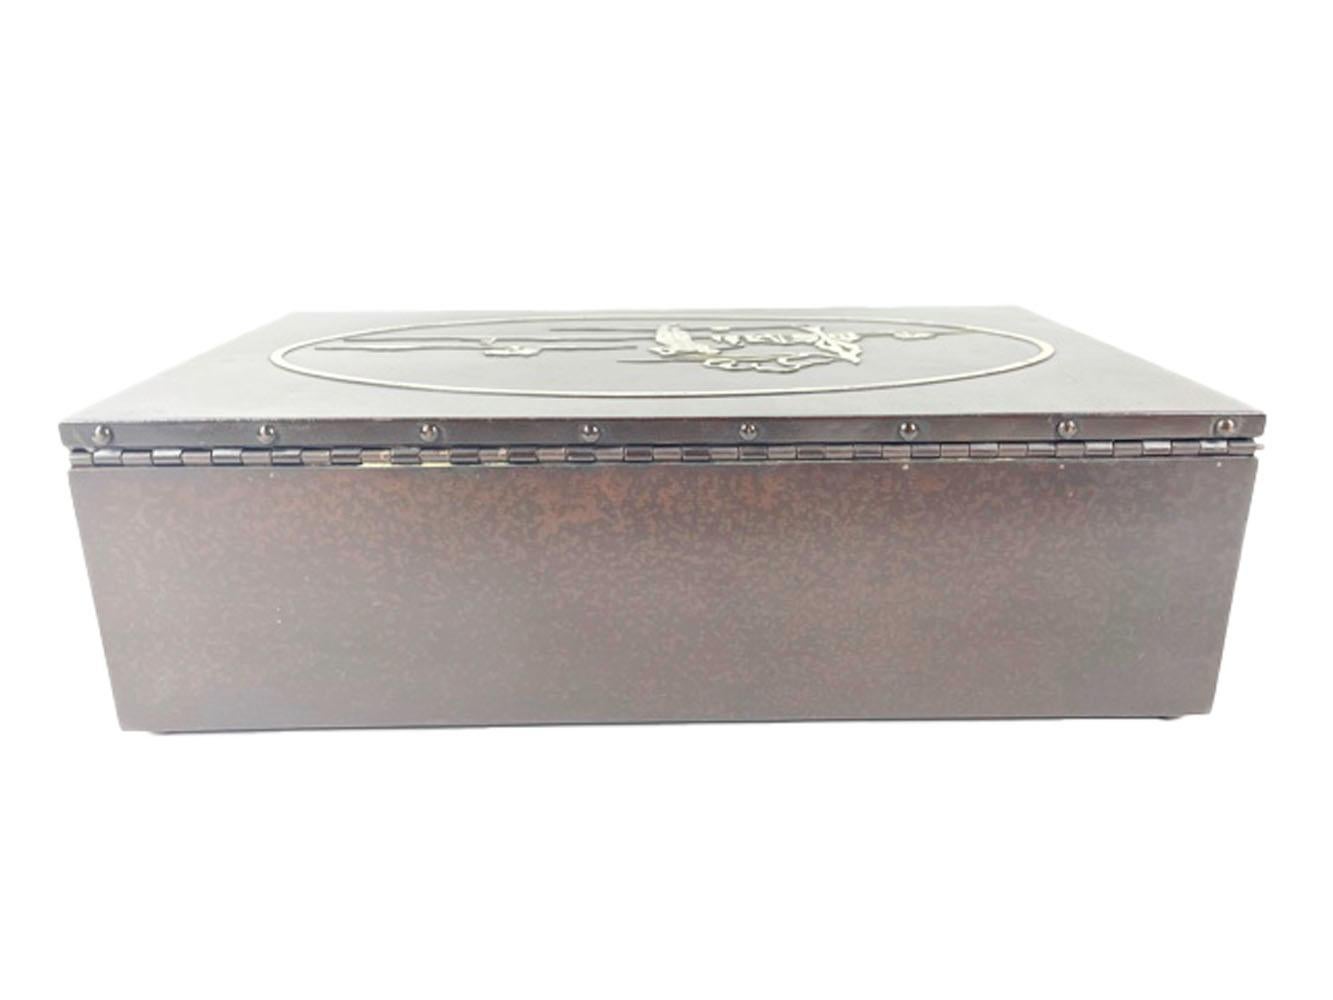 Art Deco bronze and sterling silver cigar humidor made by the Heintz Metal Art Company. Lined with cedar the rectangular bronze box has a mottled brown patina with the lid having an applied sterling silver golf themed scene. The bottom of the box is